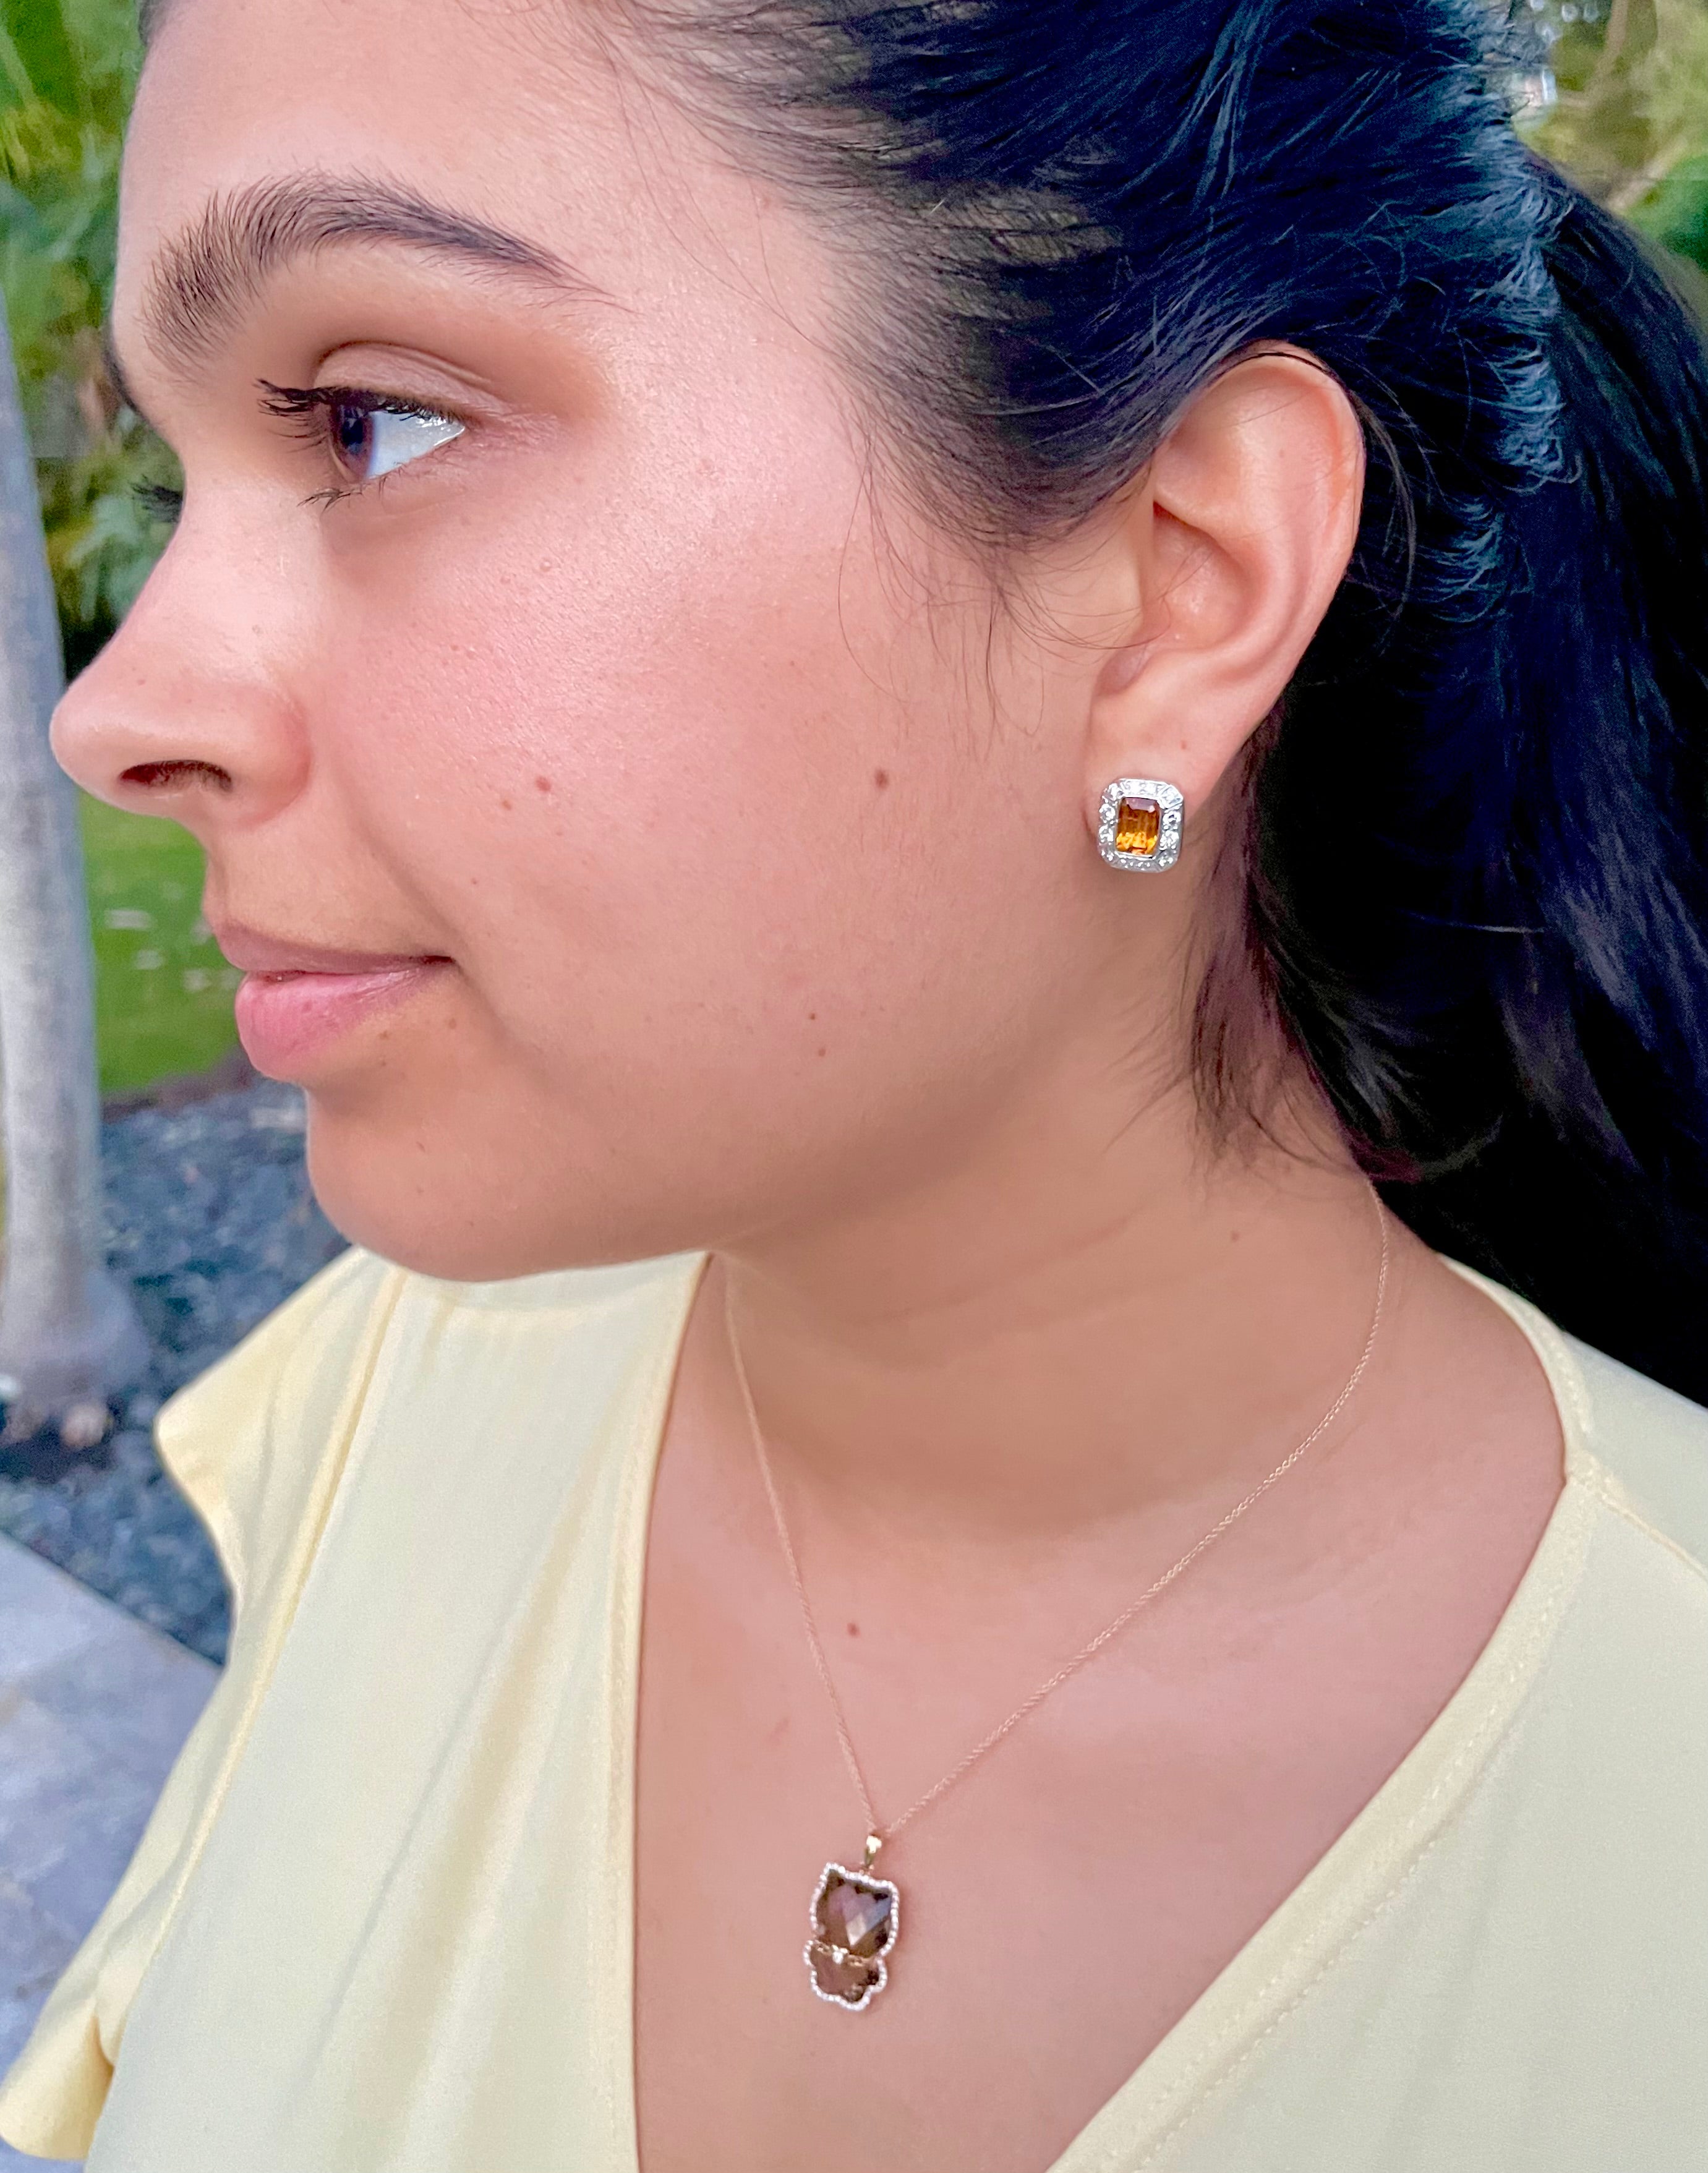 The Bezel Set Citrine Diamond Earrings offer sparkling style with 1.80 carats of round diamonds, emerald-cut citrine gems and 14k white gold. Finished with secure omega clips and a gallery finish of 14.00 mm, these earrings are a timeless addition to any jewelry collection.